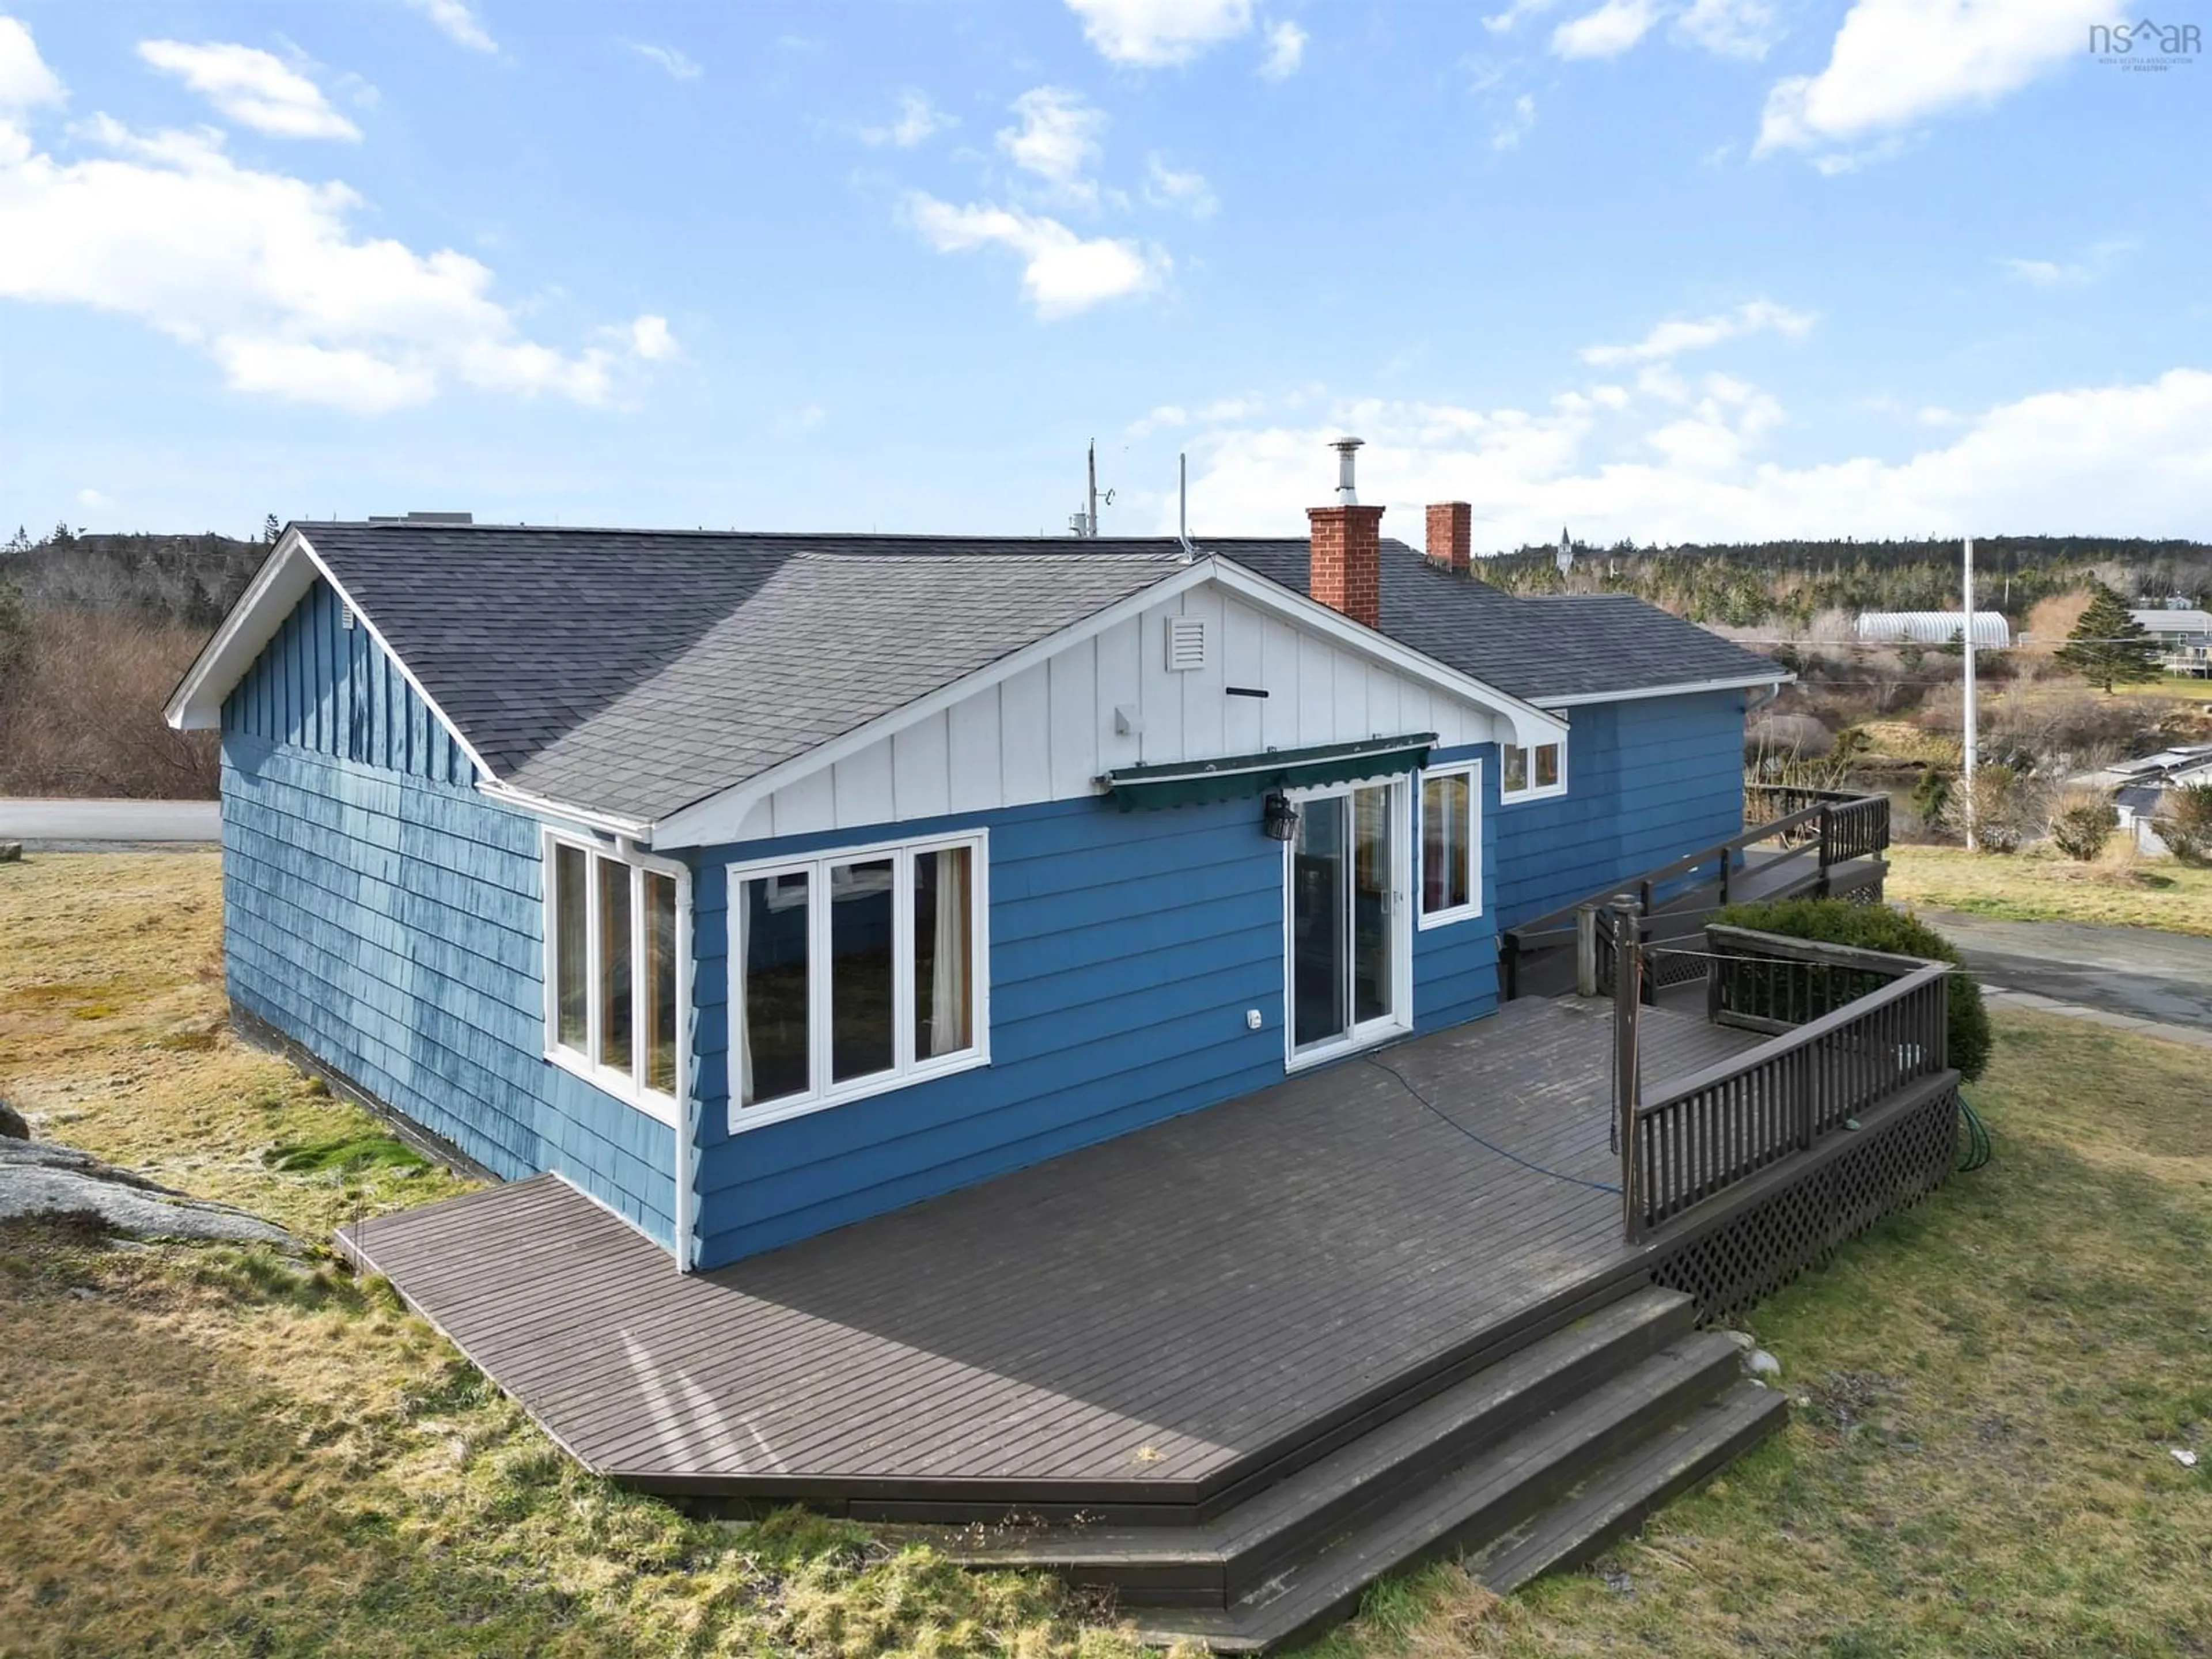 Home with unknown exterior material for 46 Learys Cove Rd, East Dover Nova Scotia B3Z 3W9